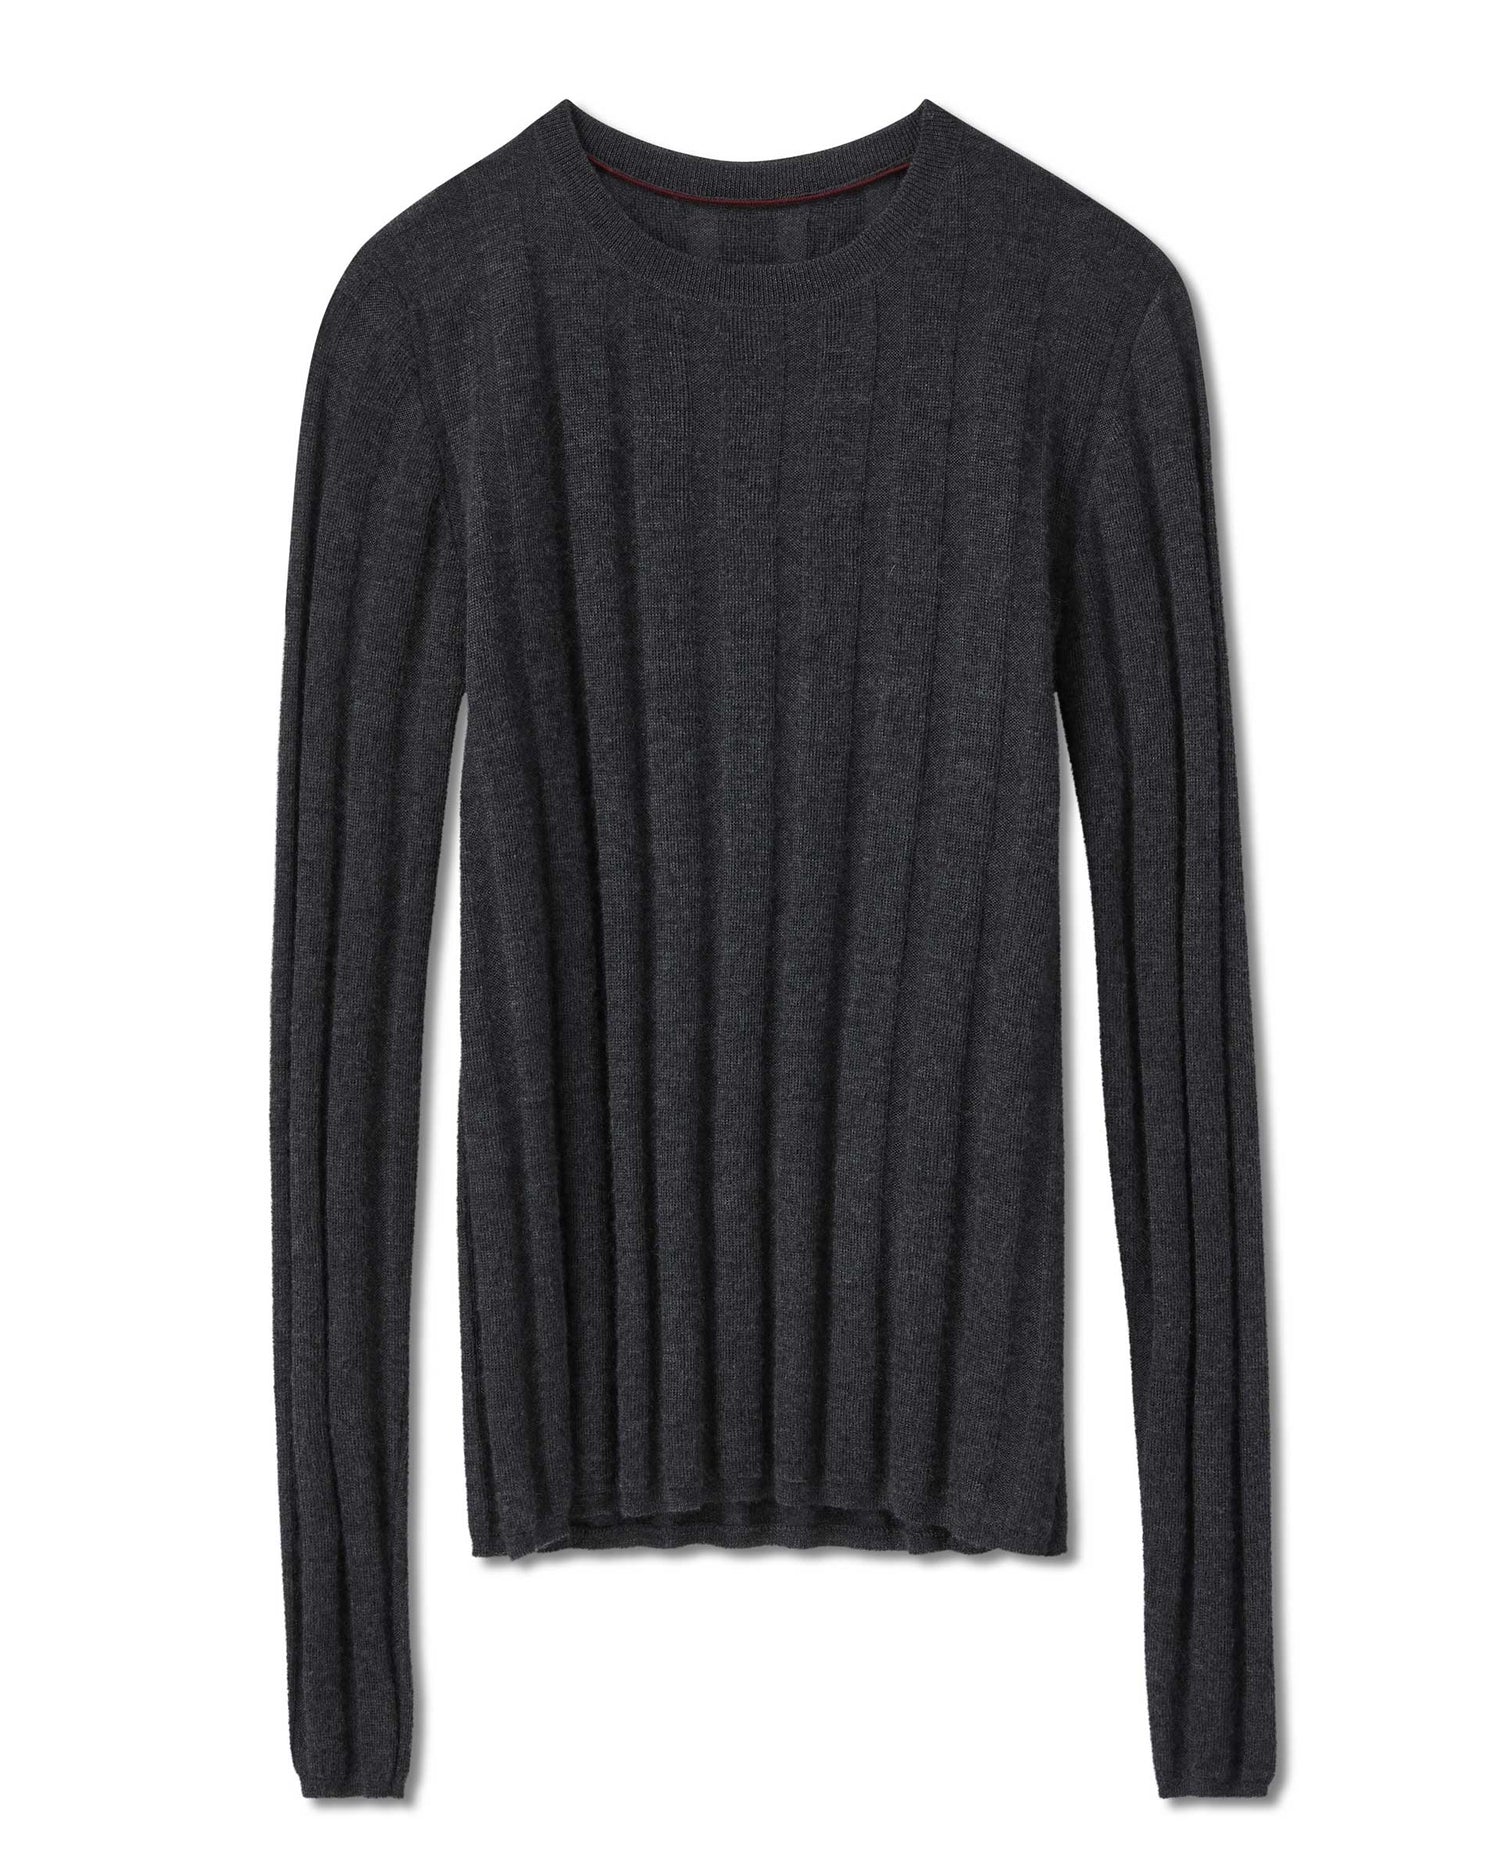 Maya Sweater in Cashmere, Charcoal